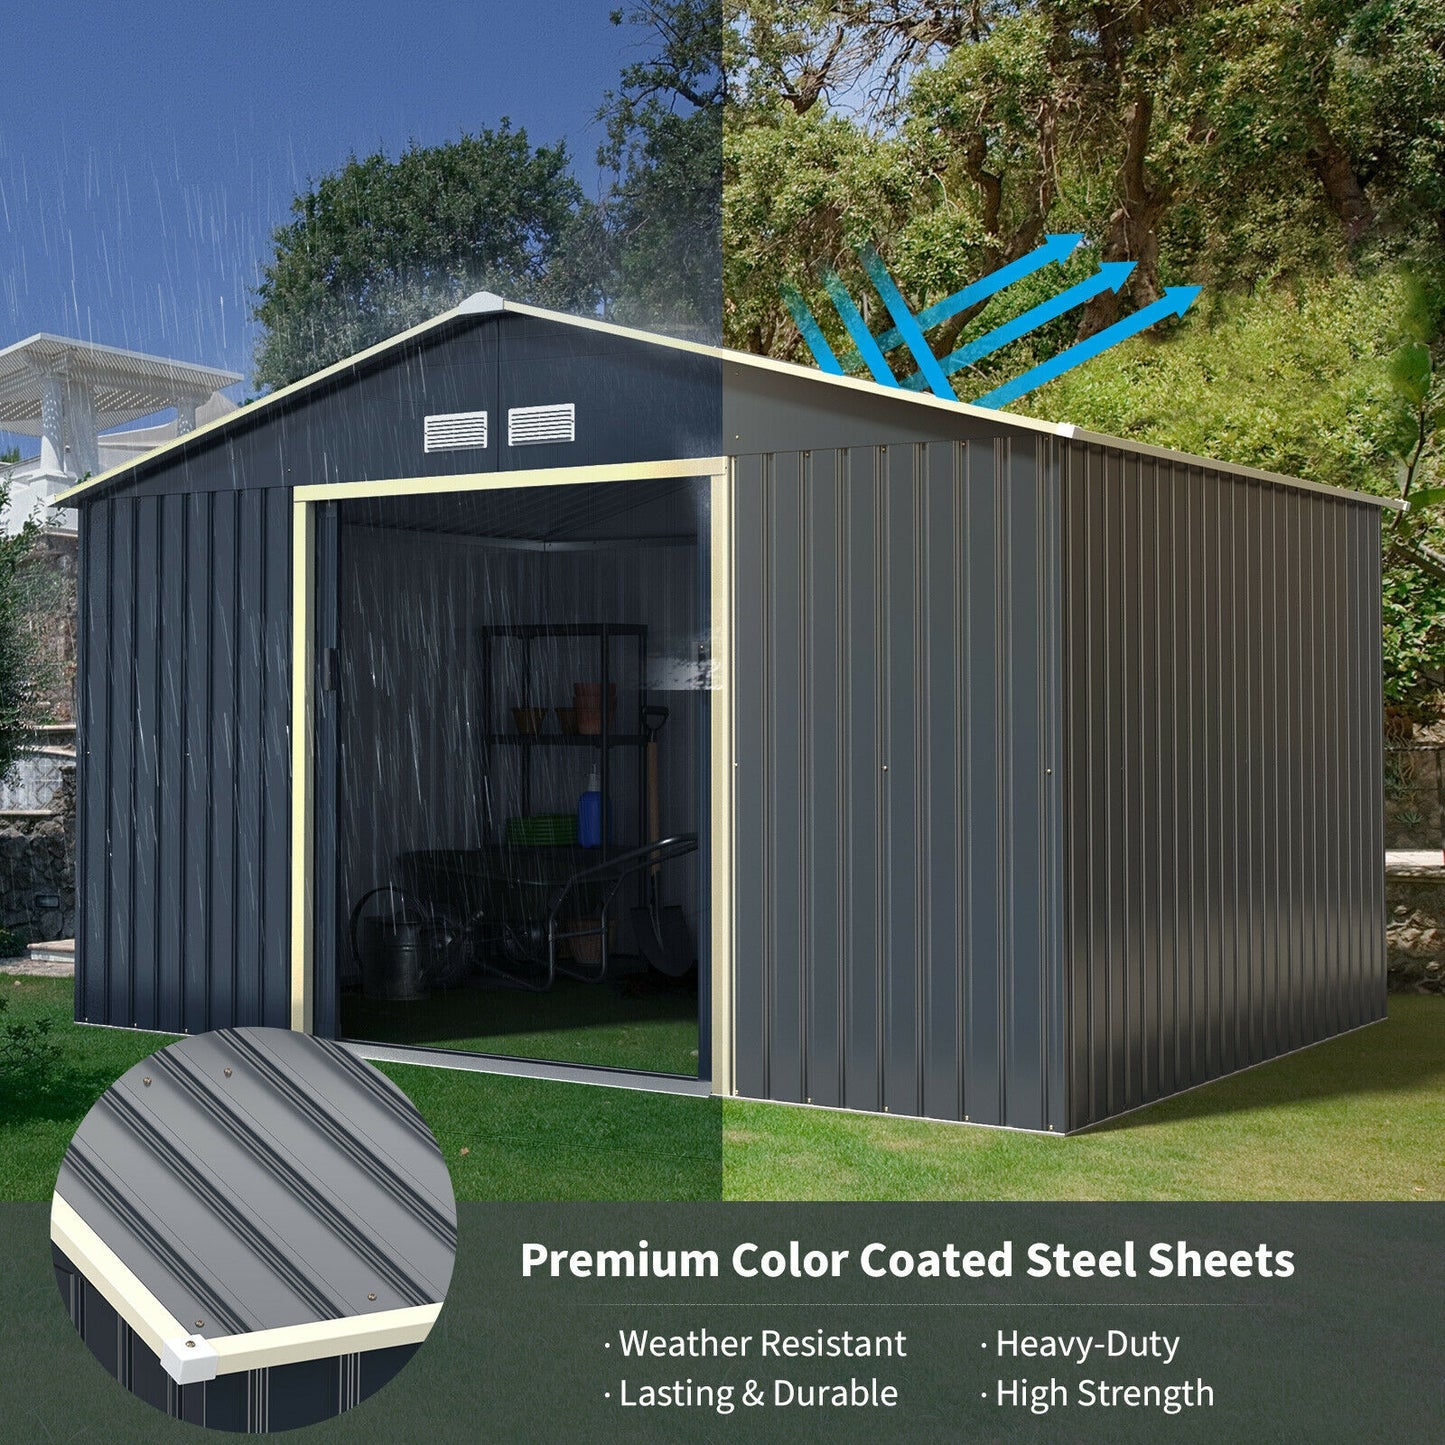 11 x 8 Feet Metal Storage Shed for Garden and Tools with 2 Lockable Sliding Doors-Gray